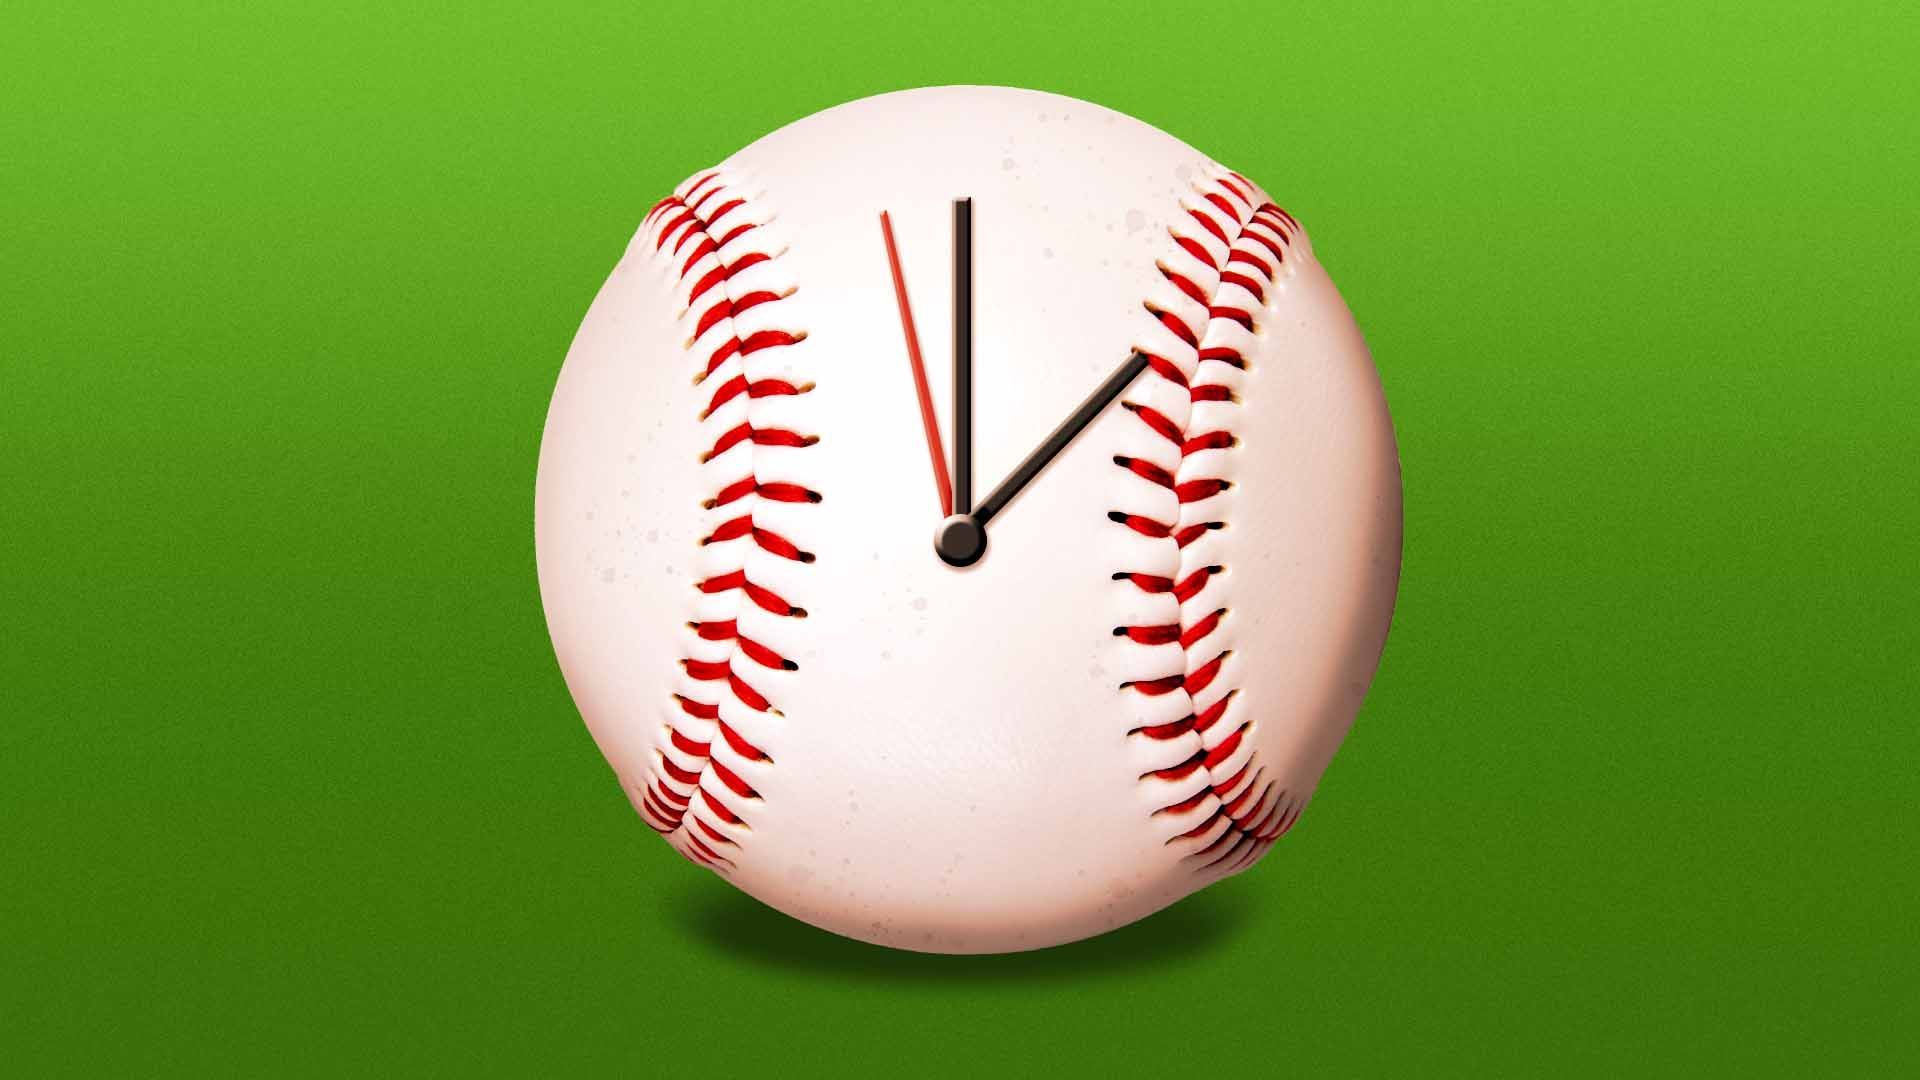 Illustration of a baseball with a clock face on it